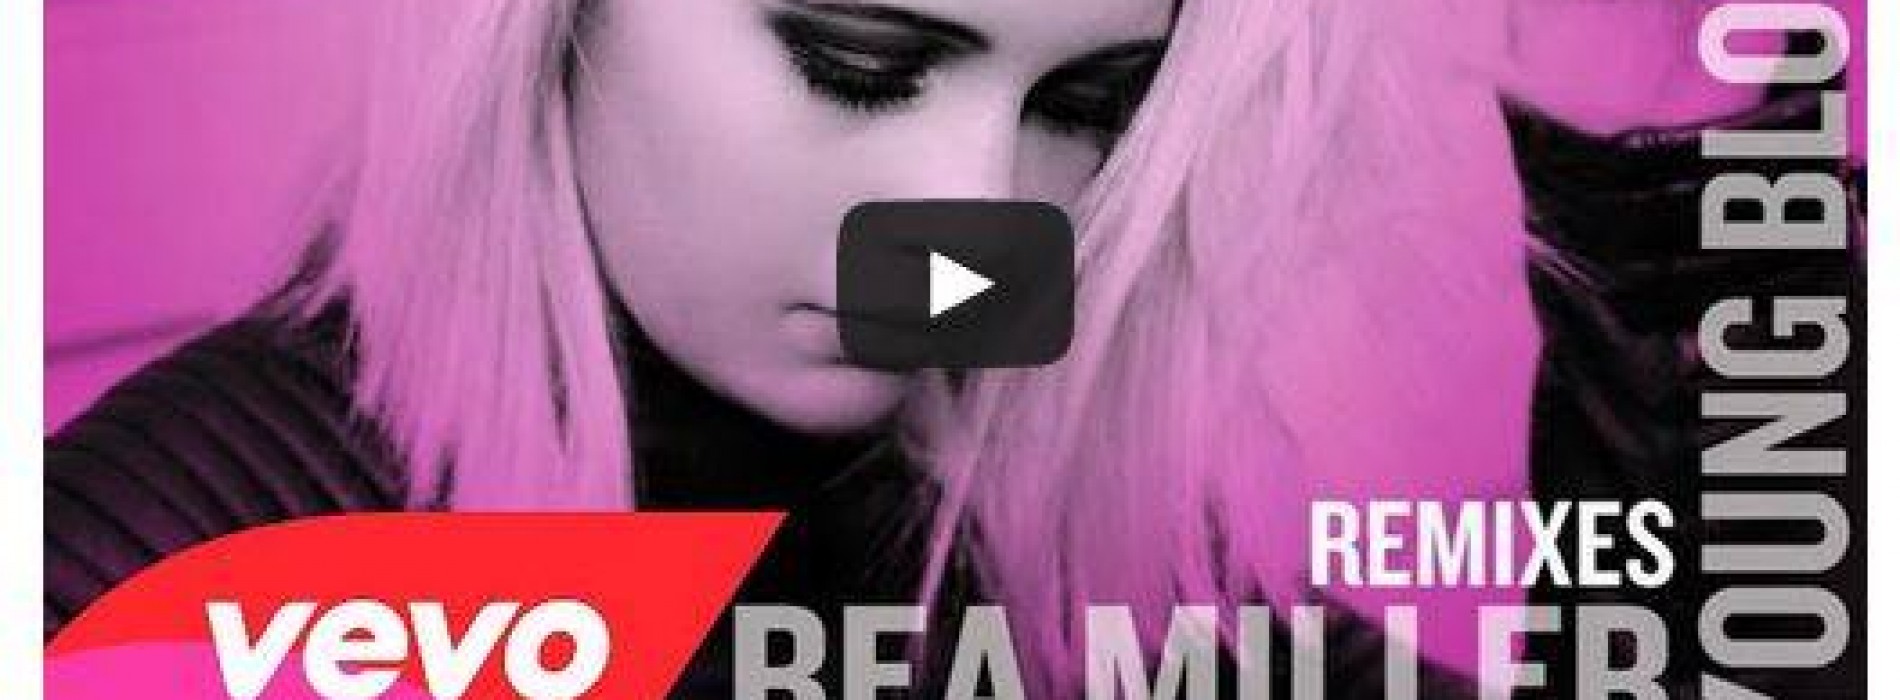 Dropwizz’s Remix Of Bea Millers “Young Blood”Got An Official Release Thru Hollywood Records